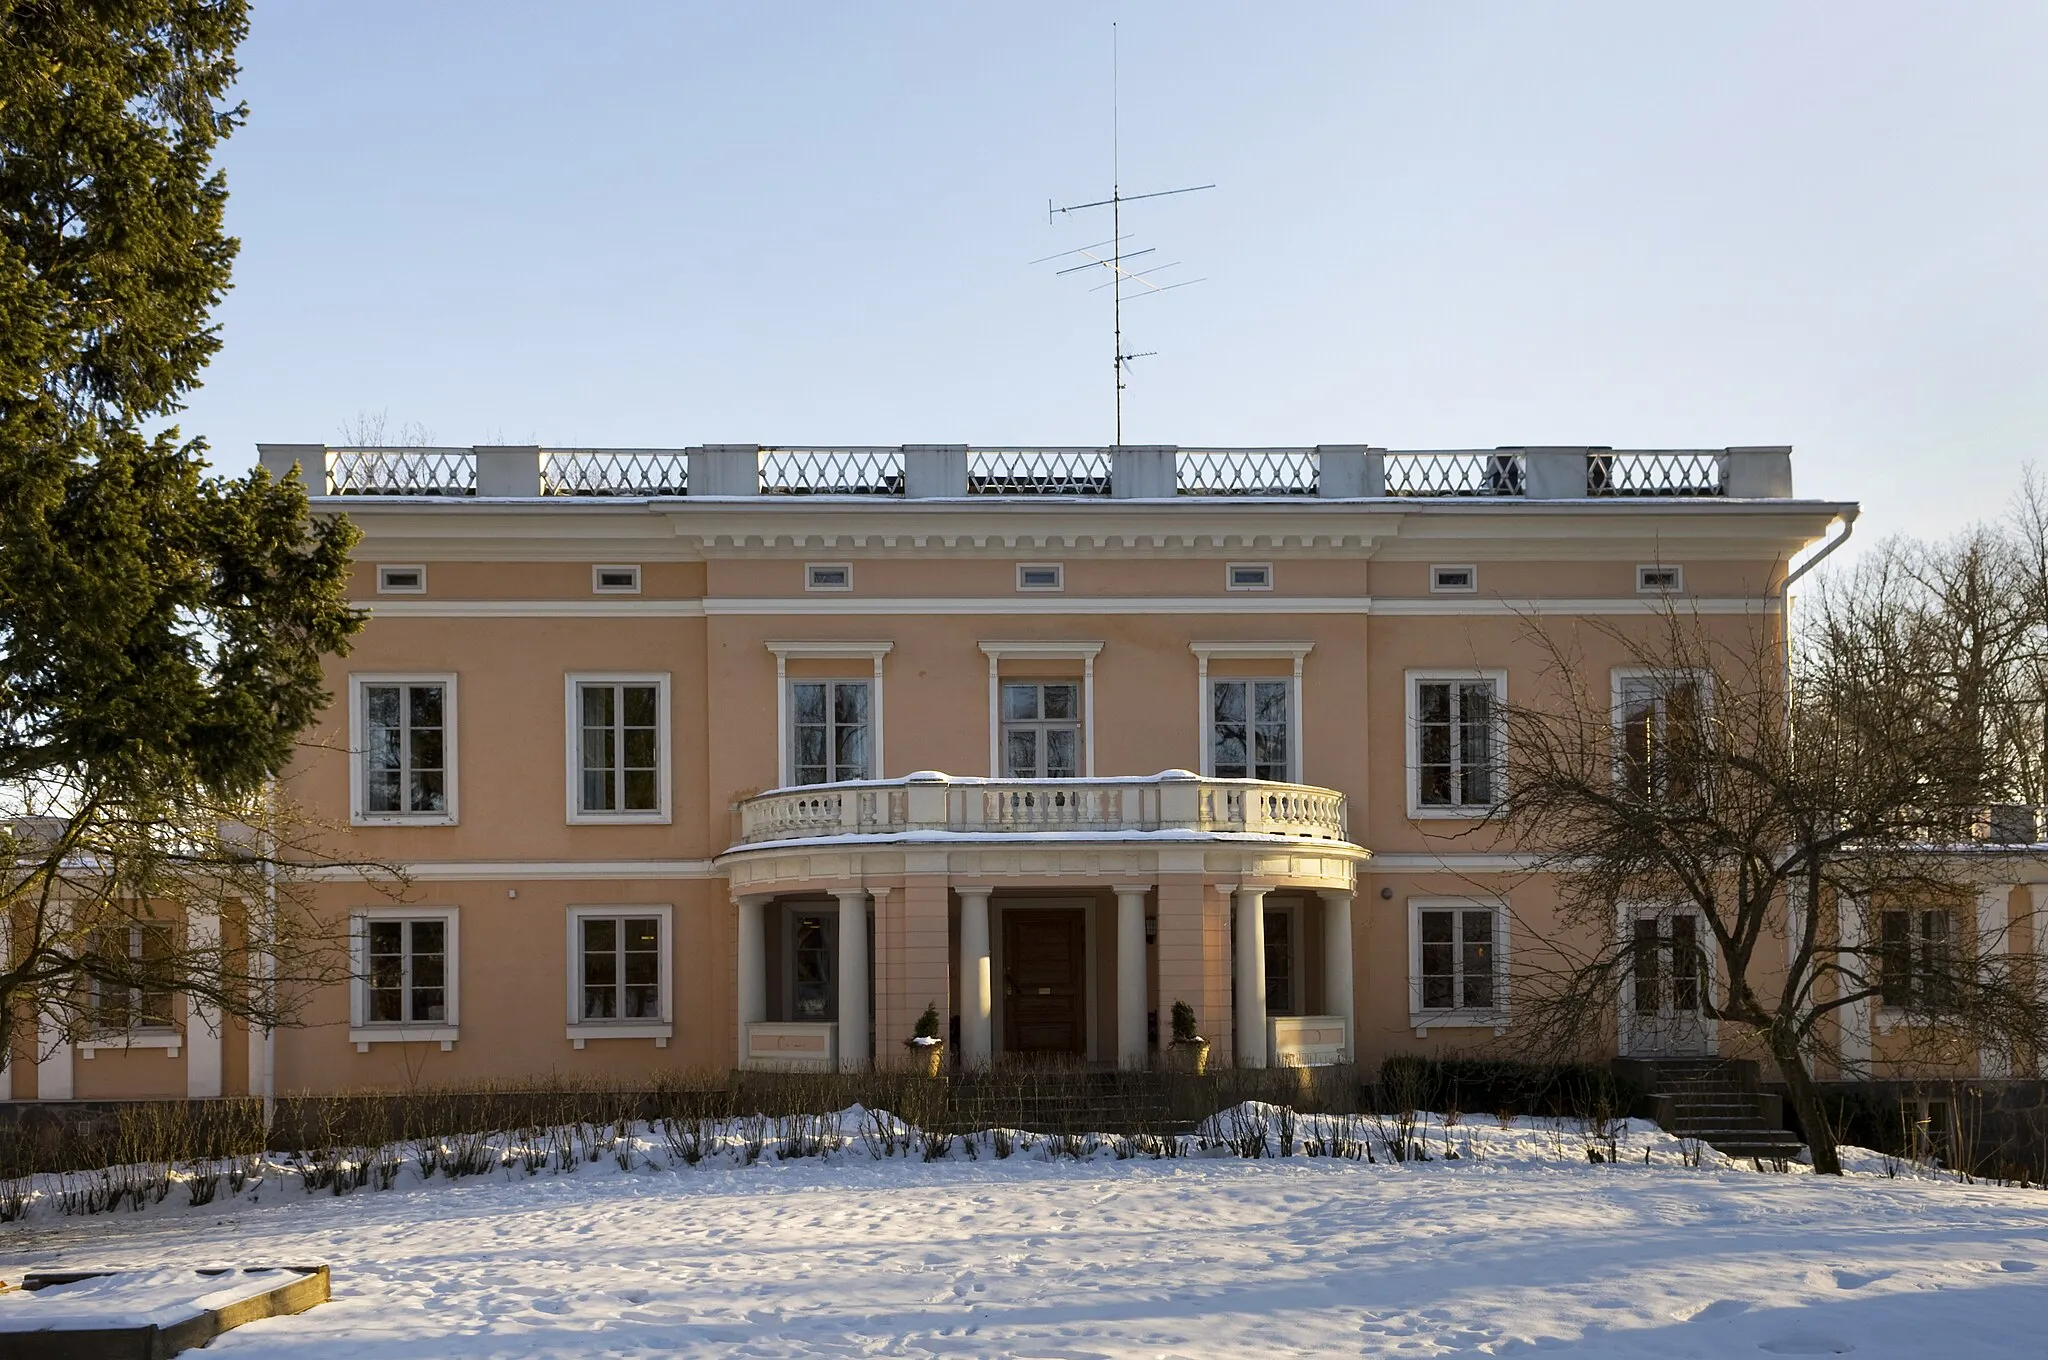 Photo showing: The Munkkiniemi manor in Helsinki, Finland. The main building is from 1815 and was expanded in 1839. Kone Corporation owns the building.